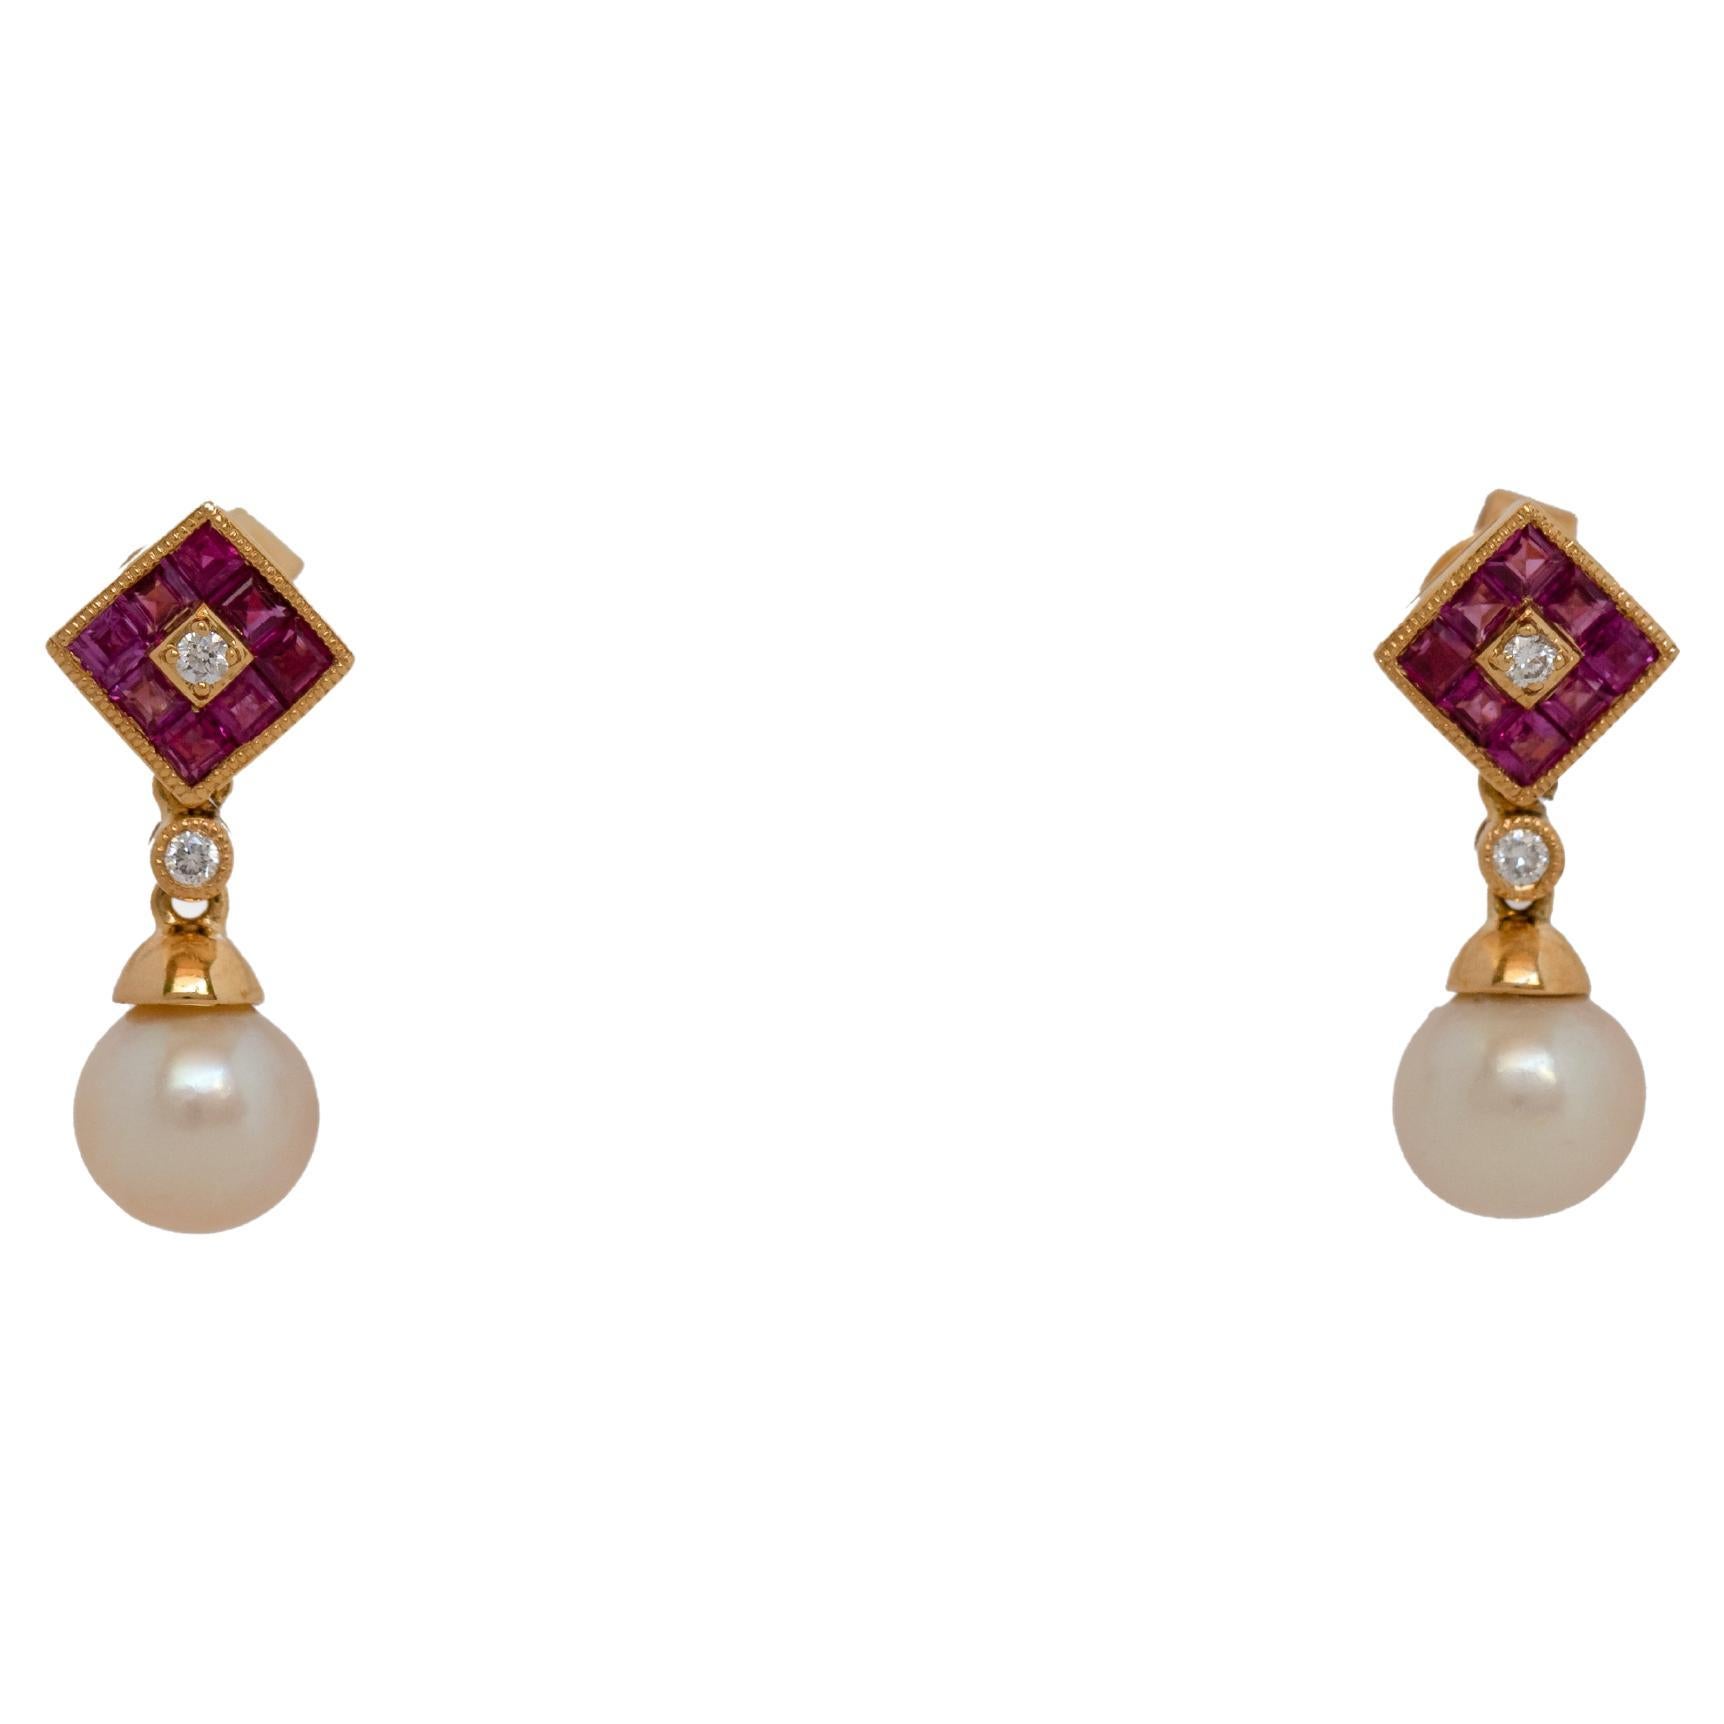 Certified Natural Bahraini Pearls Earrings with Rubies and Diamonds in 18Kt Gold For Sale